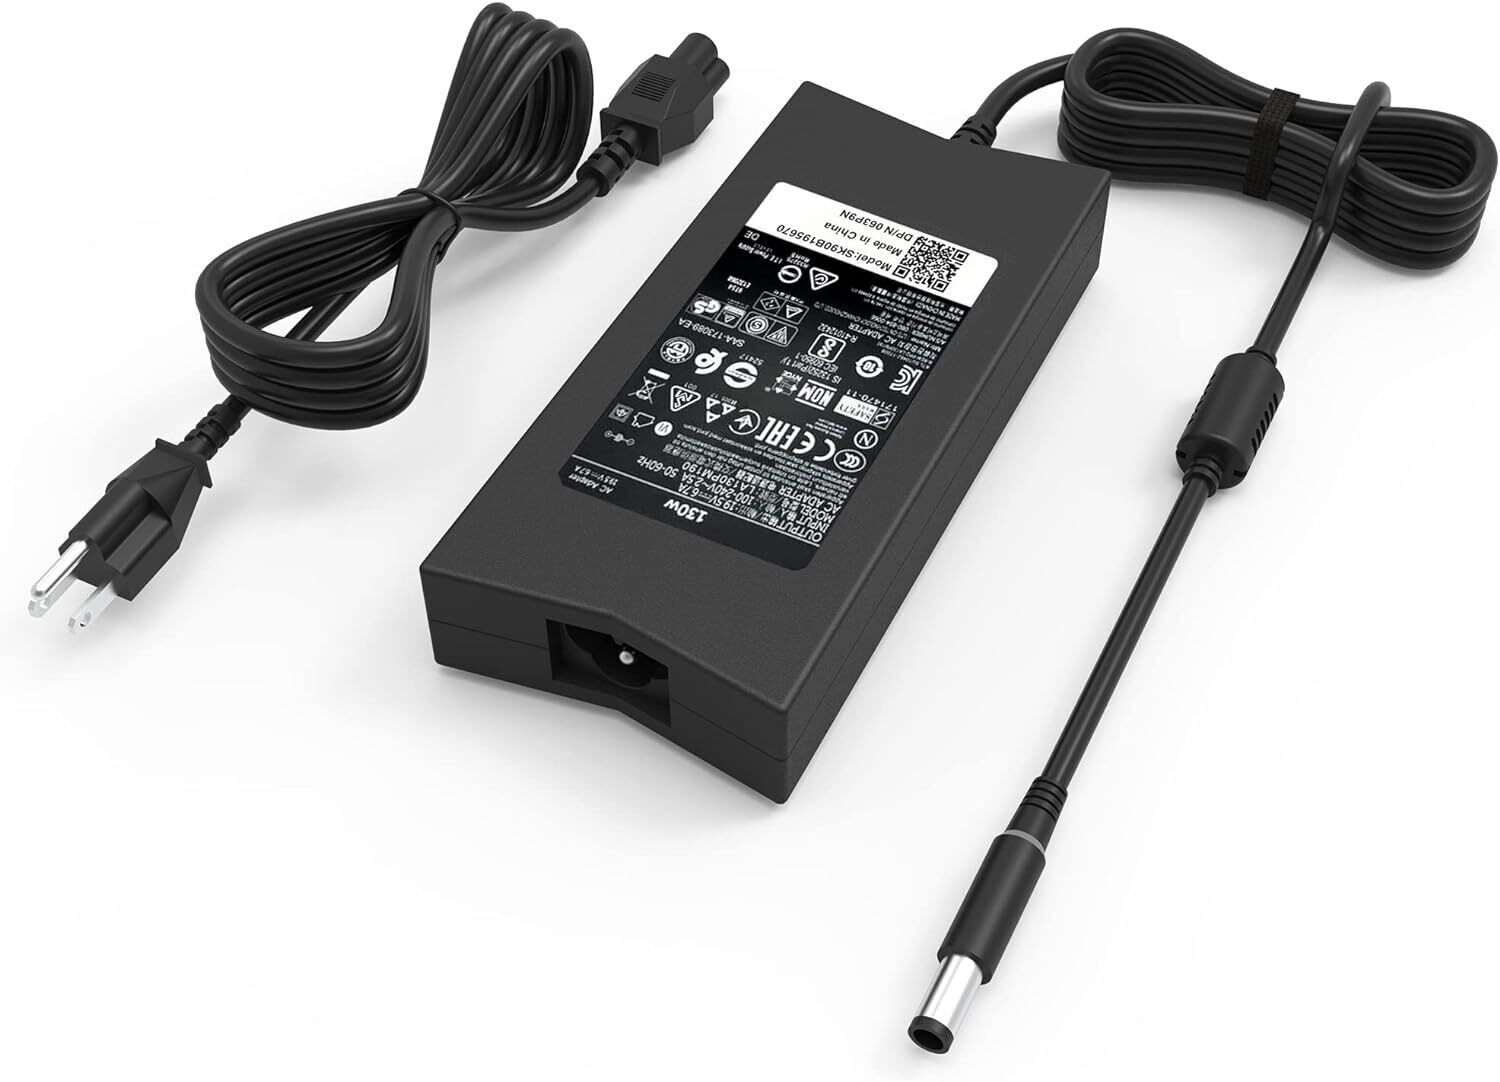 Replacement New Dell 130W 7.4mm Tip AC Adapter Charger for PA 4E LA130PM121 DA13